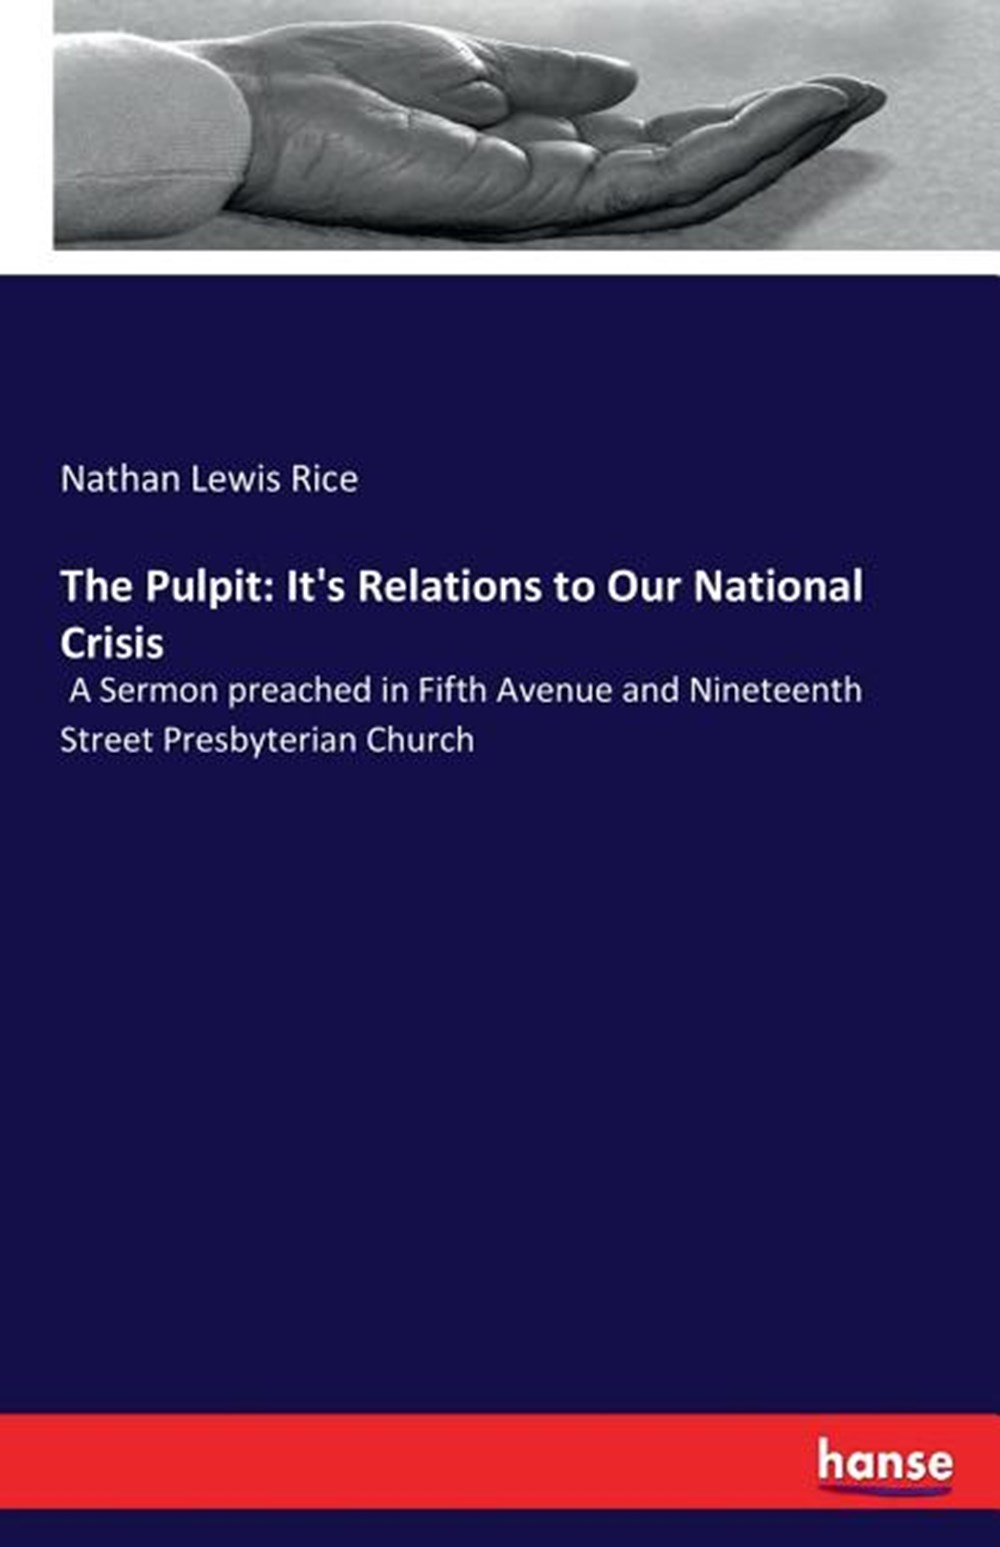 Pulpit: It's Relations to Our National Crisis: A Sermon preached in Fifth Avenue and Nineteenth Stre